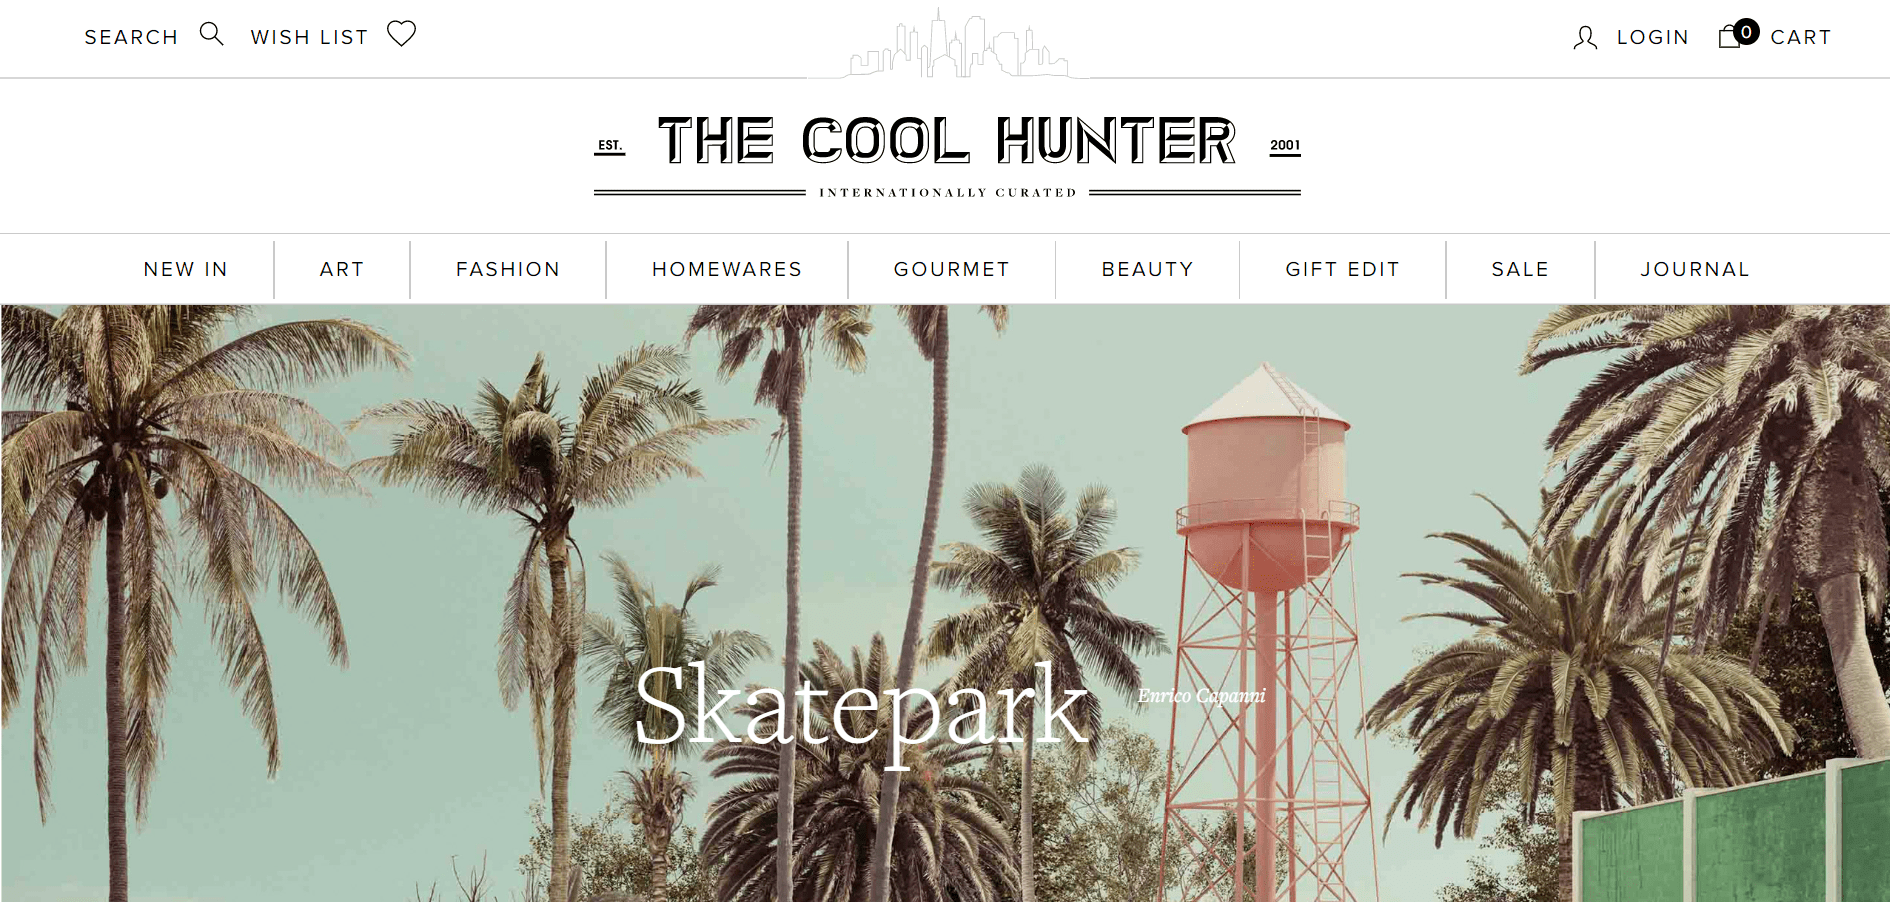 Landing page of The Cool Hunter 